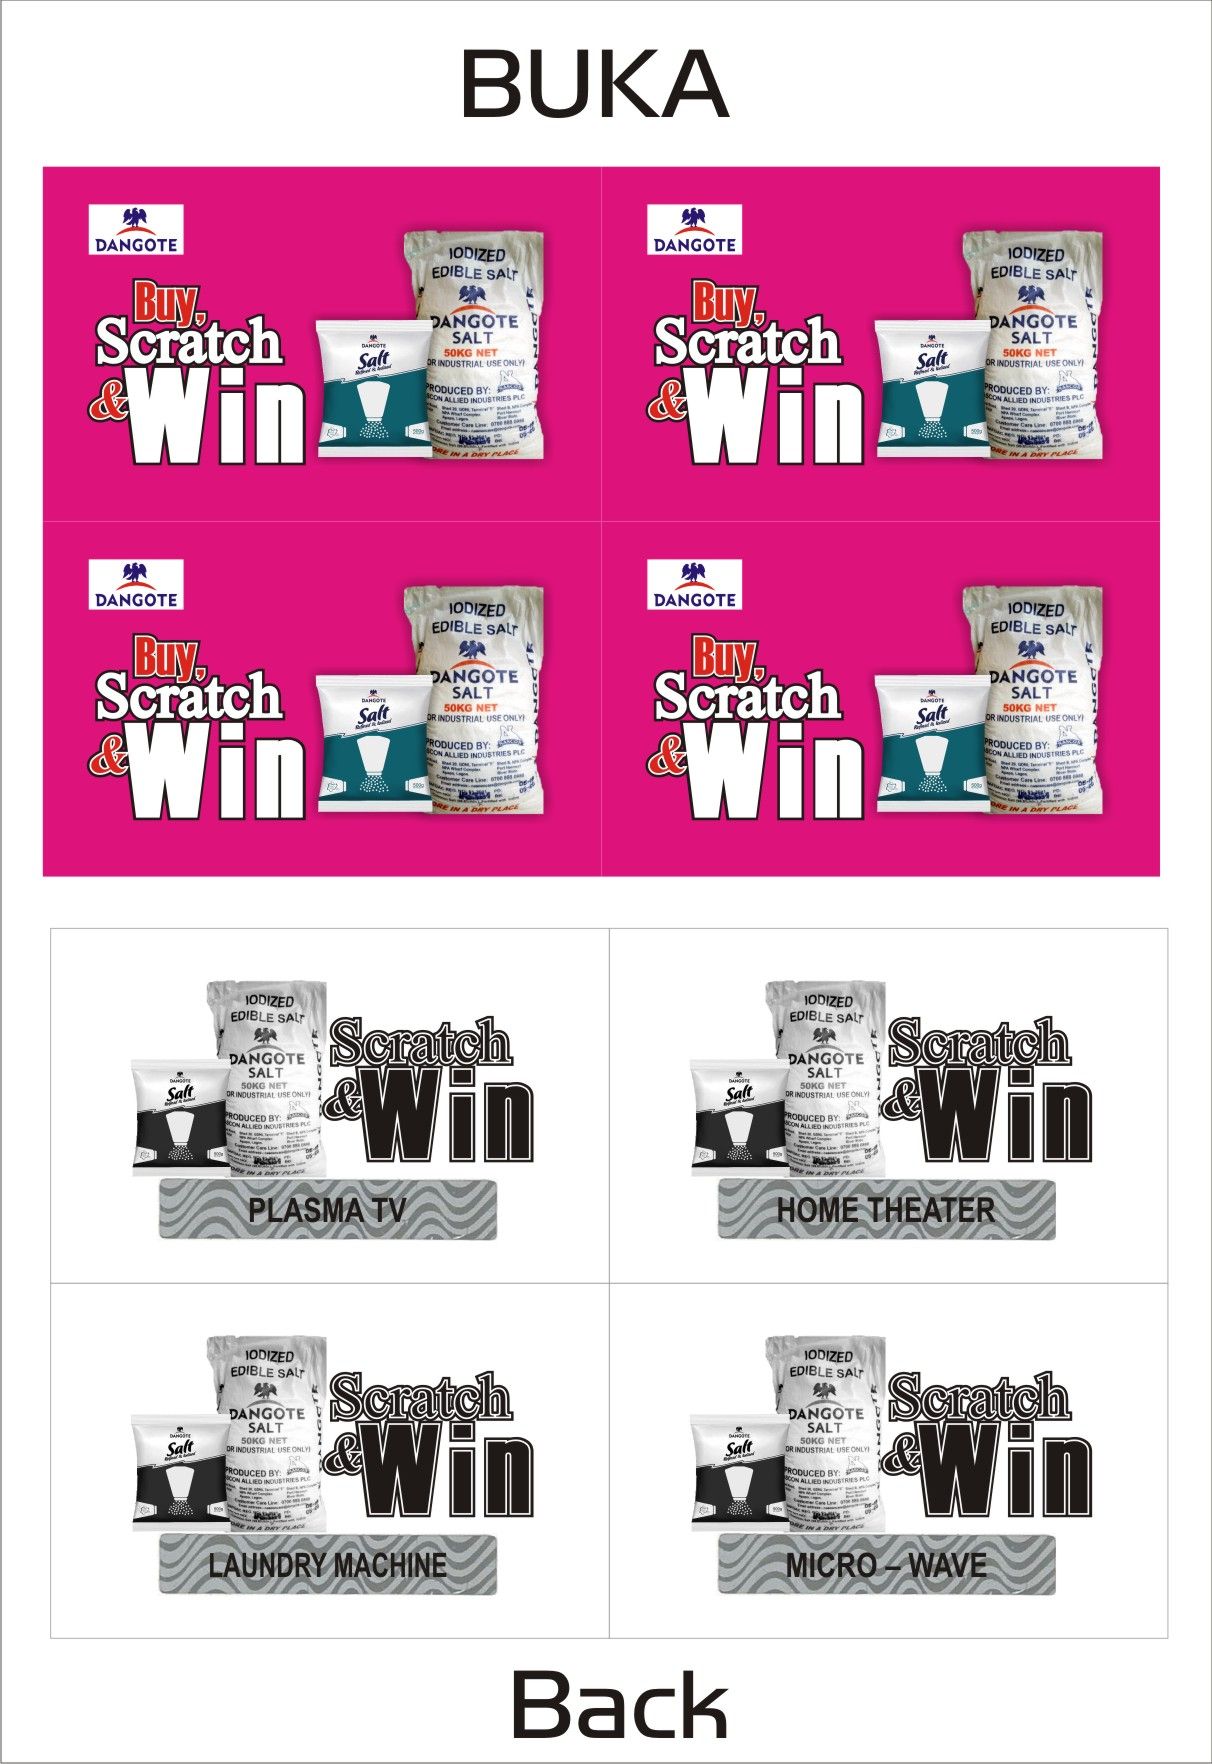 CALL CHINEDU ON 09022536974 TO PRINT SCRATCH AND WIN PROMO CARDS, STUDENTS PORTAL ACCESS SCRATCH CARDS, E-PAYMENT CARDS,ETC